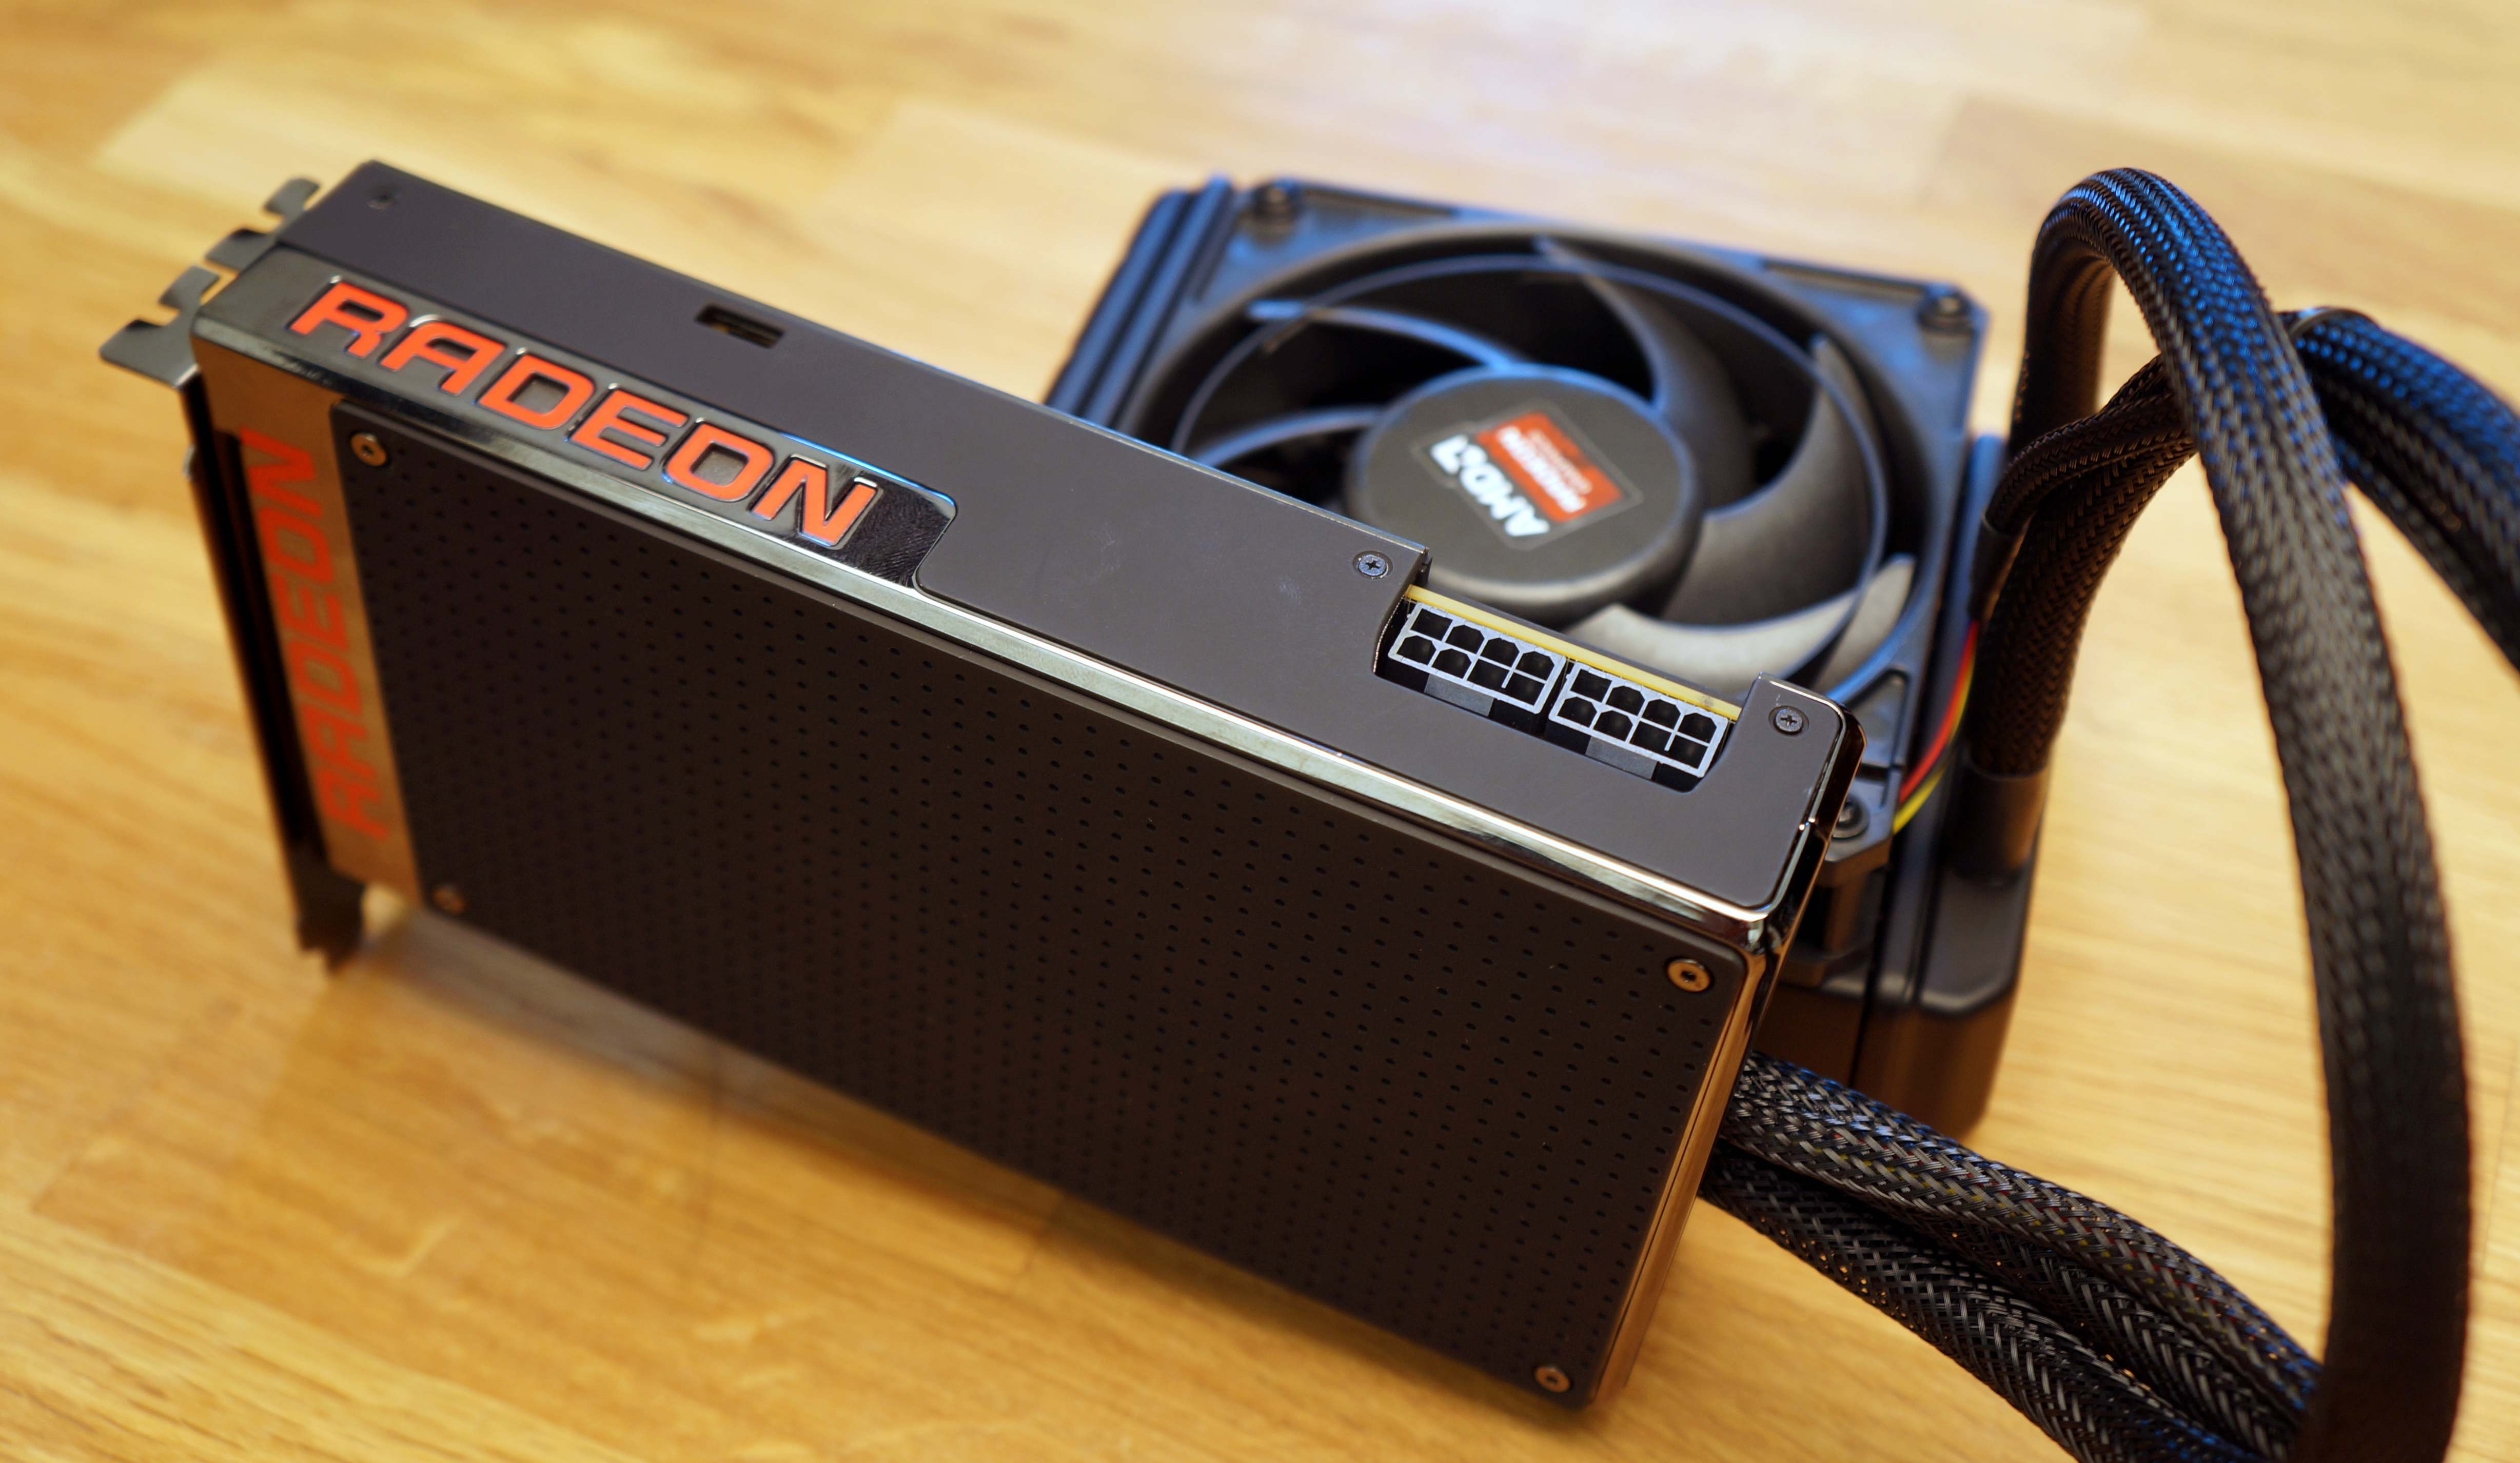 AMD Radeon R9 Fury X tested: not quite 